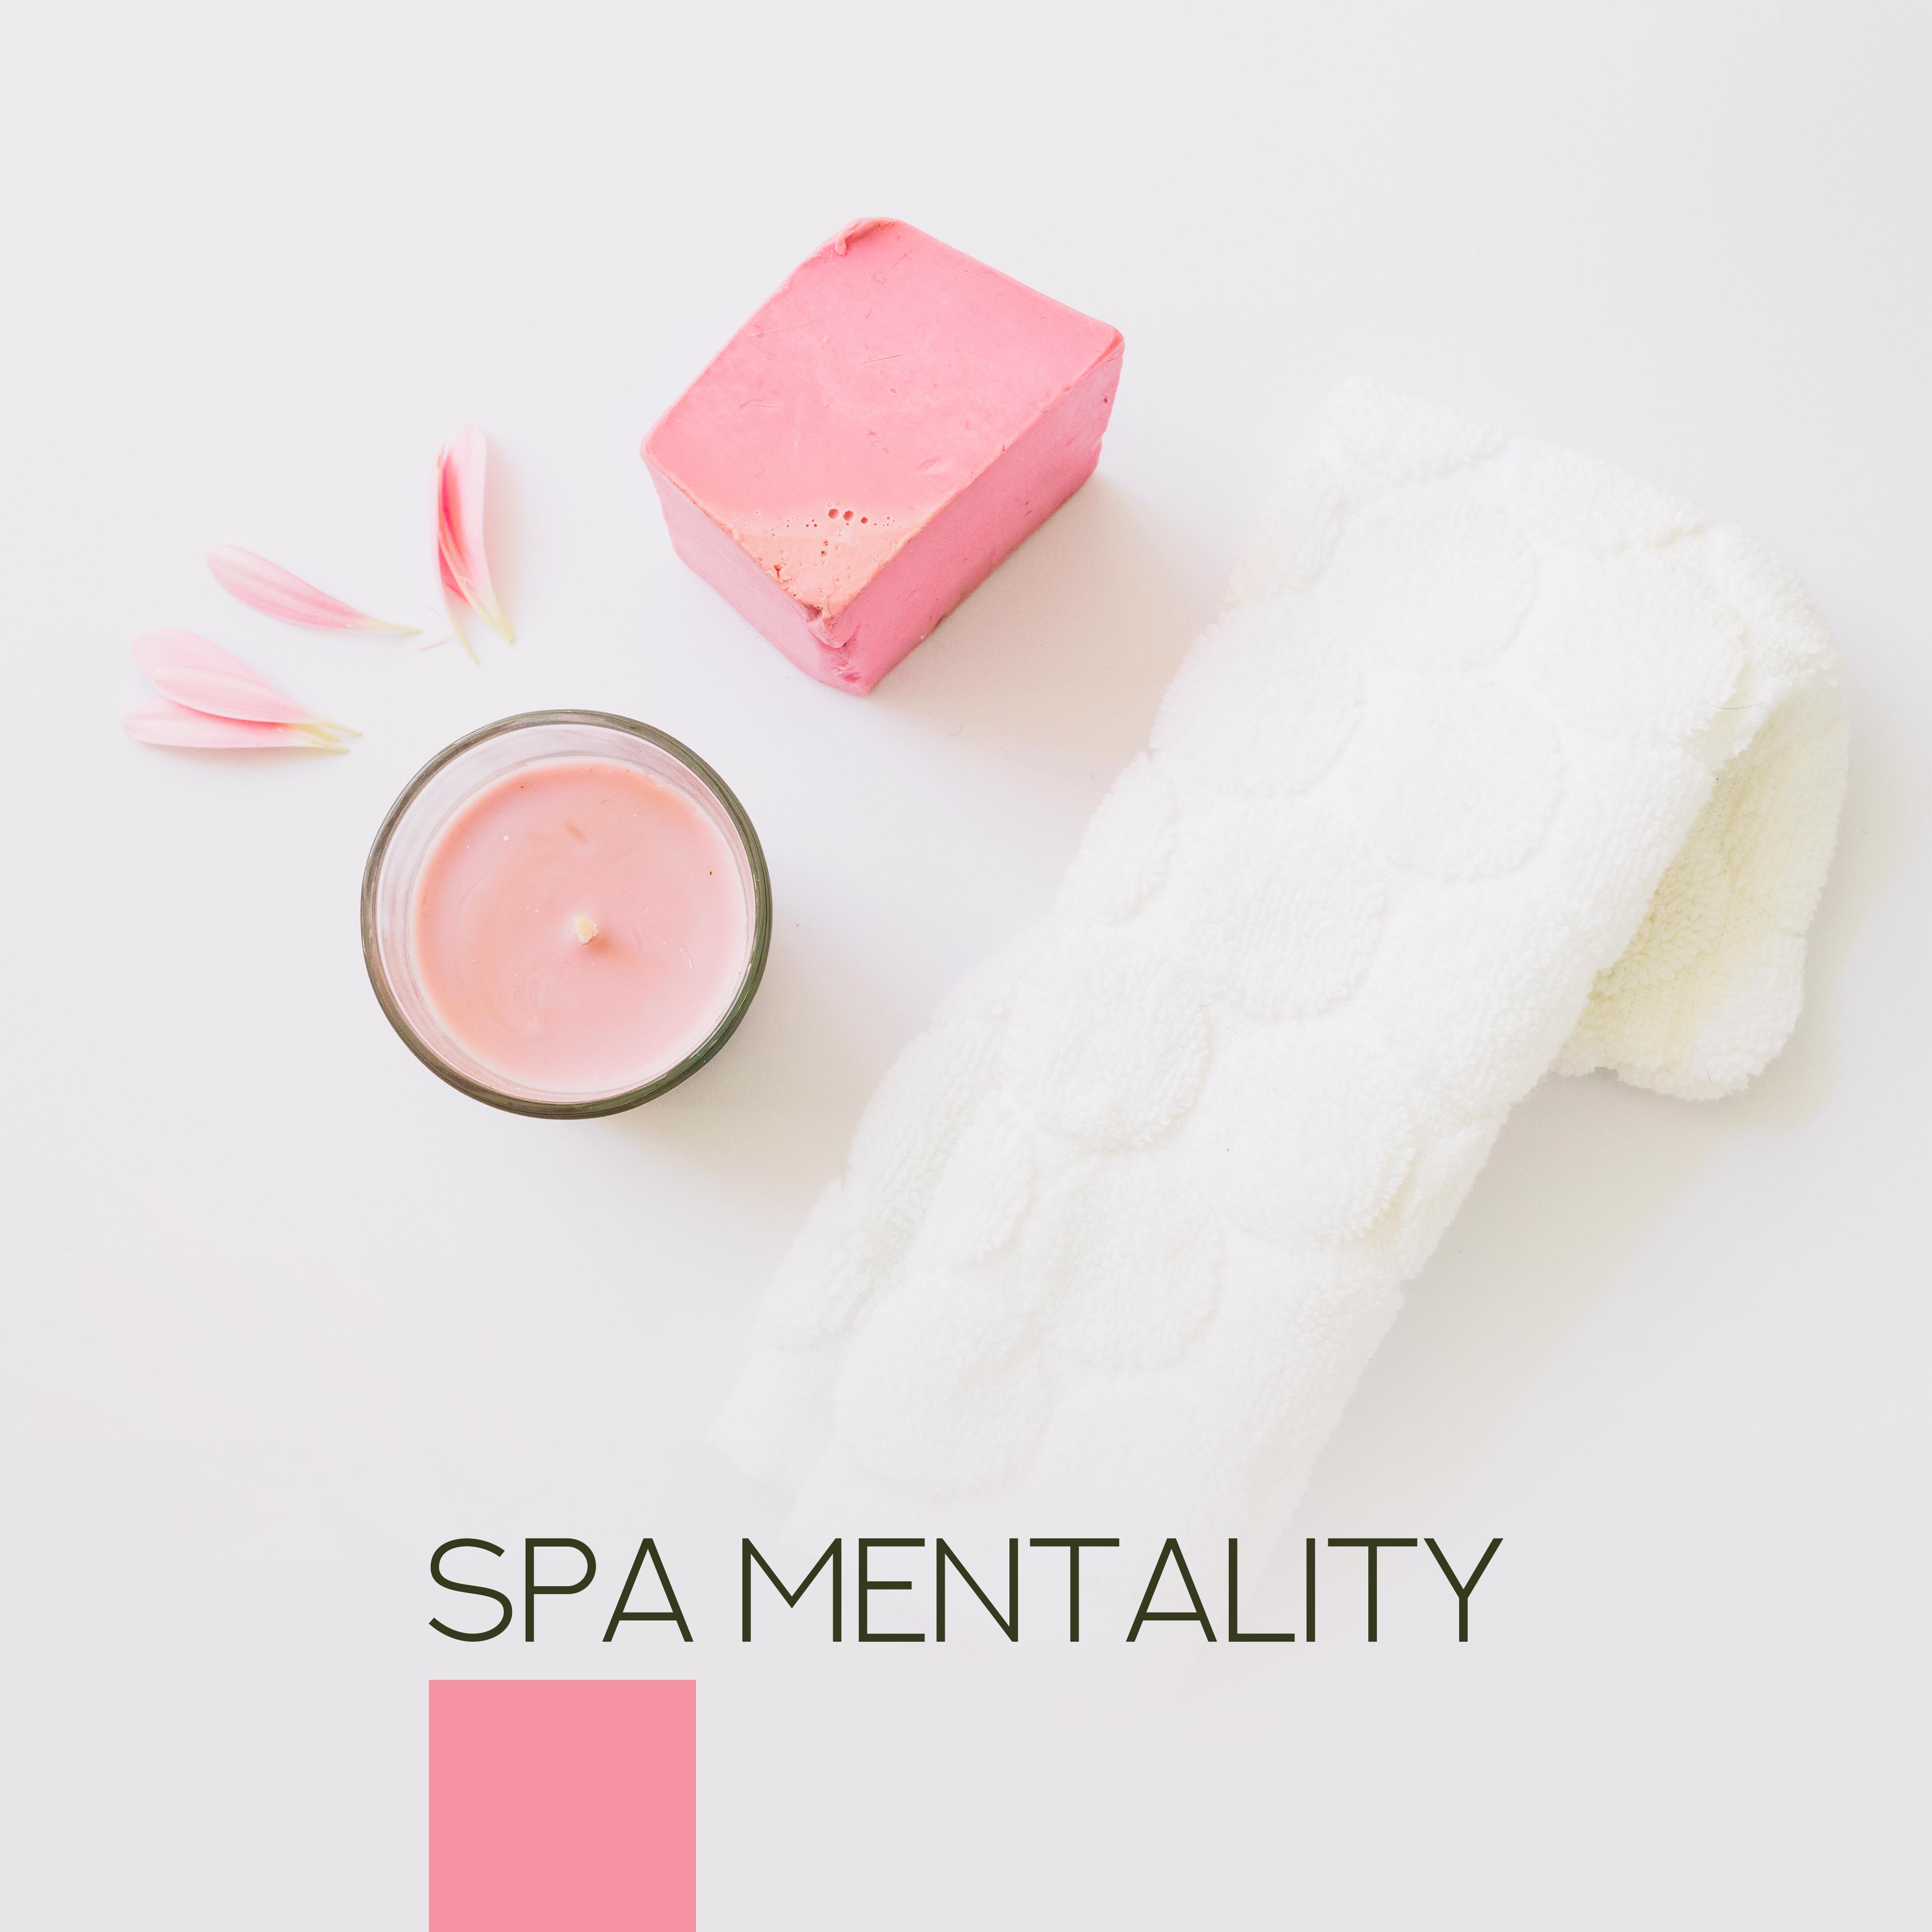 Spa Mentality - Spiritual Yoga Music, Relaxing Meditation Music, Calm Down, Stress Relief, Healing Melodies to Rest